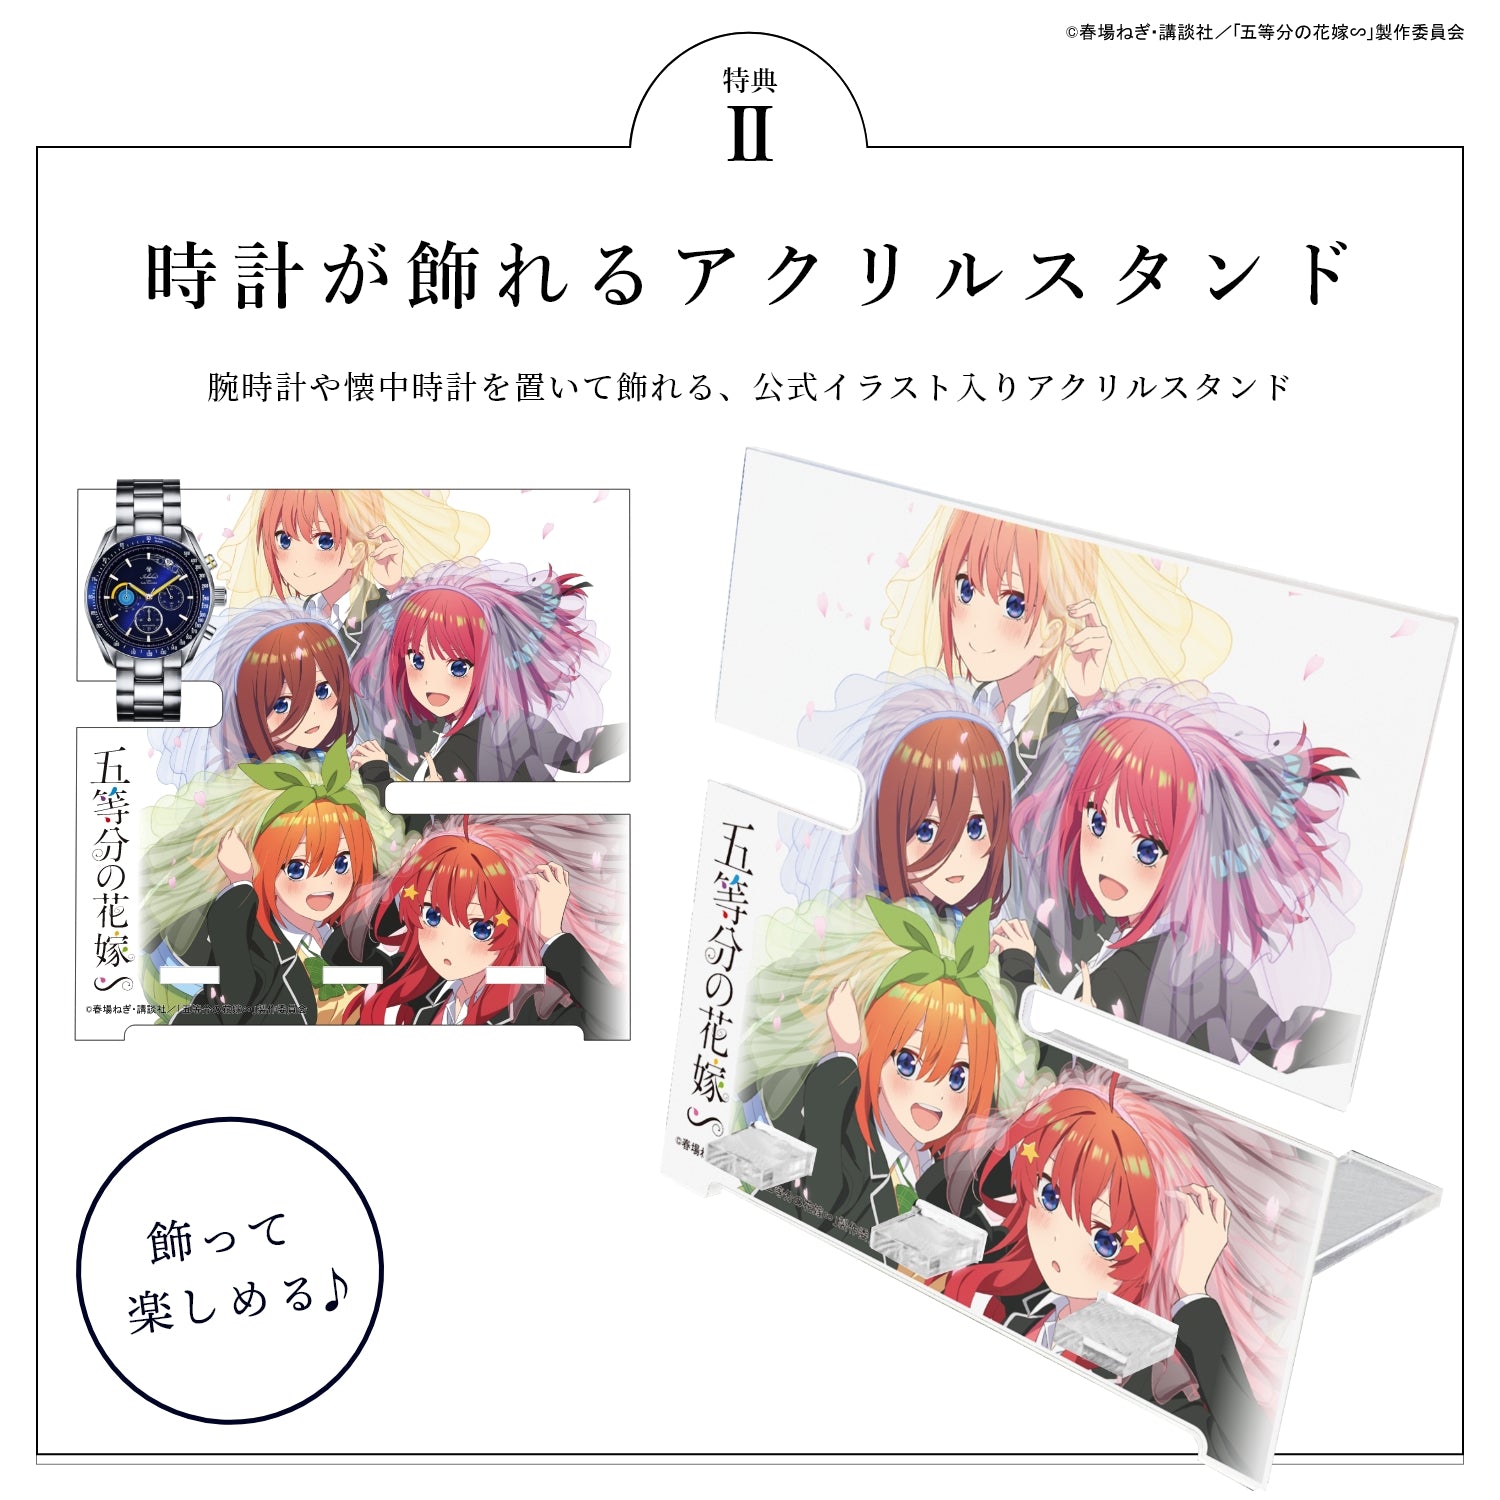 TV special anime“The Quintessential Quintuplets” Radio Solar Chronograph Winter Special model Change with belt| Itsuki Nakano